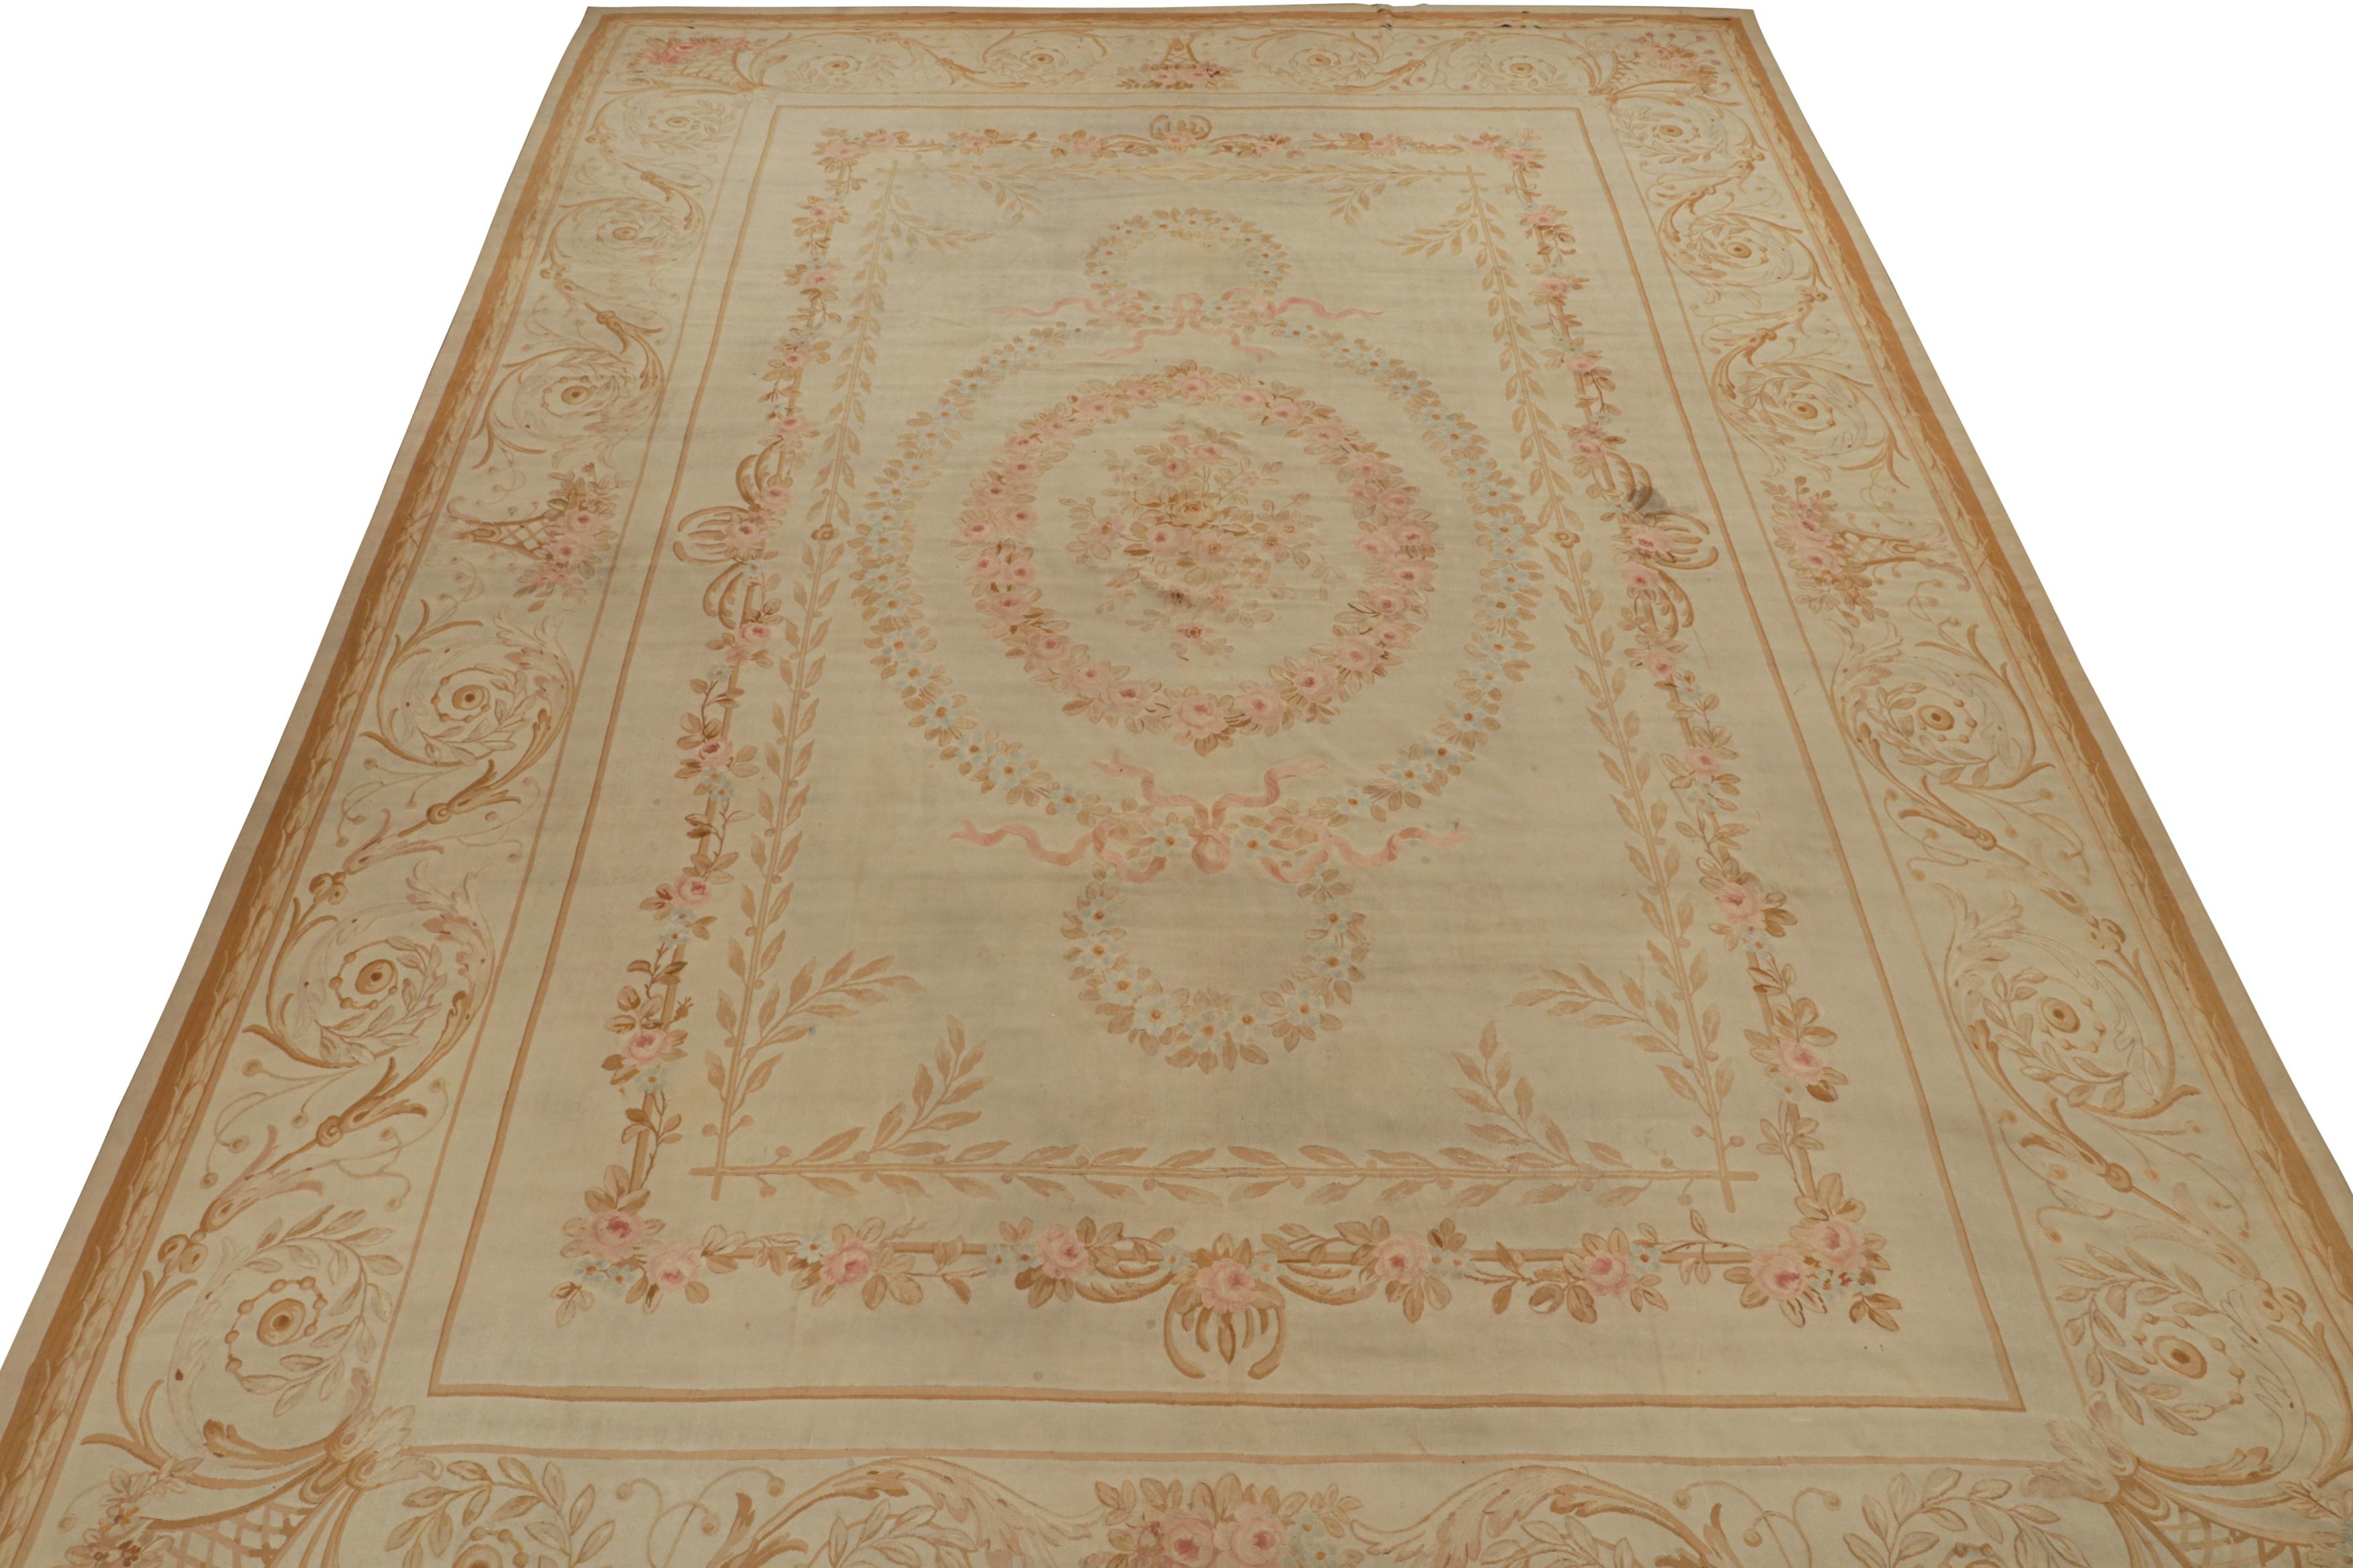 French Oversized Antique Aubusson Flatweave Floral Rug in Beige & Pink For Sale